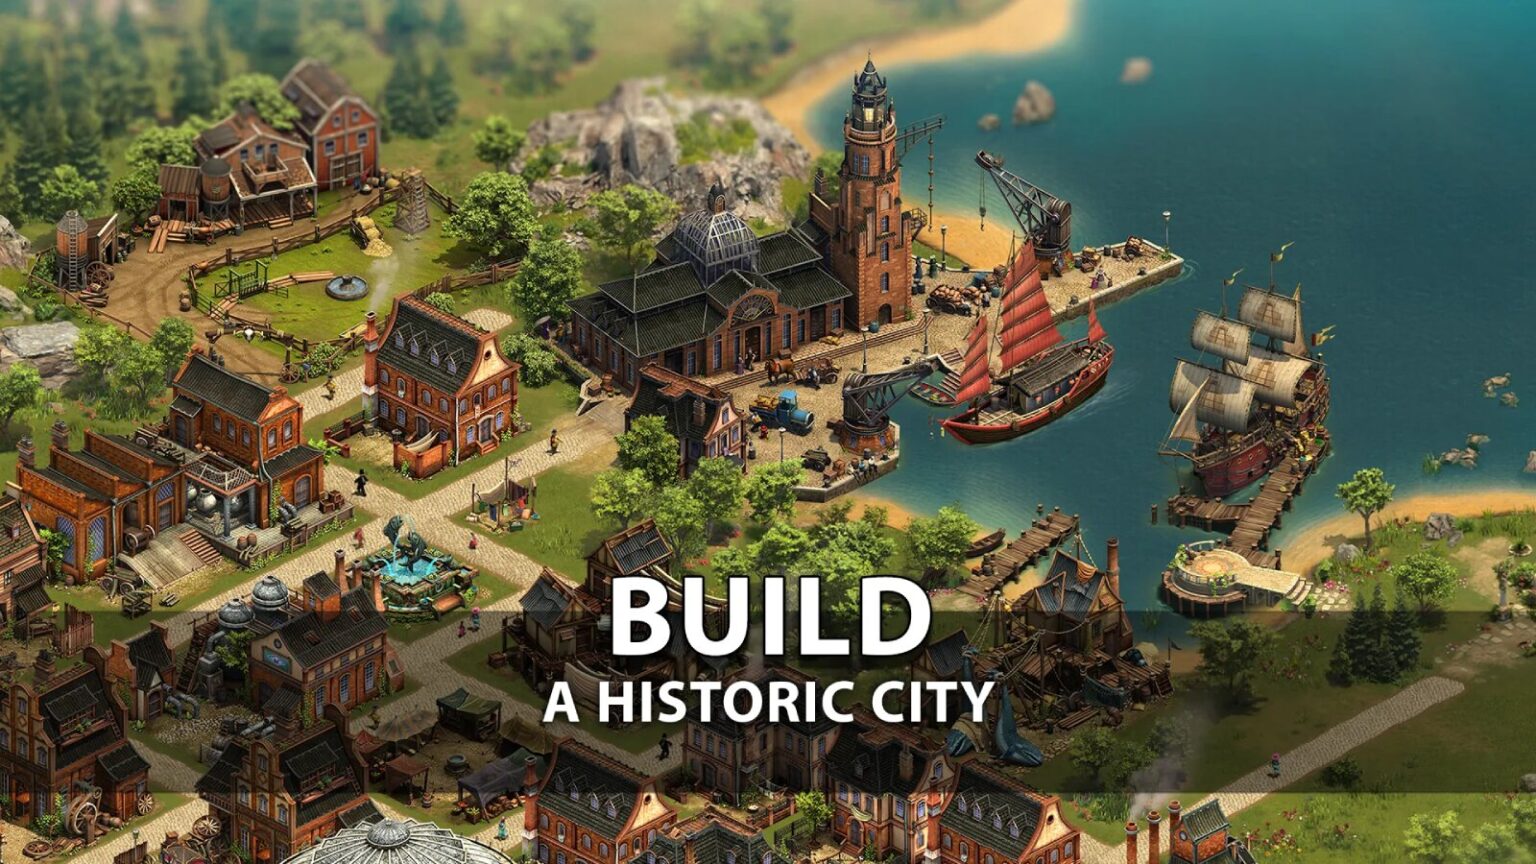 City-builder mobile game showcases vibrant historic town creation